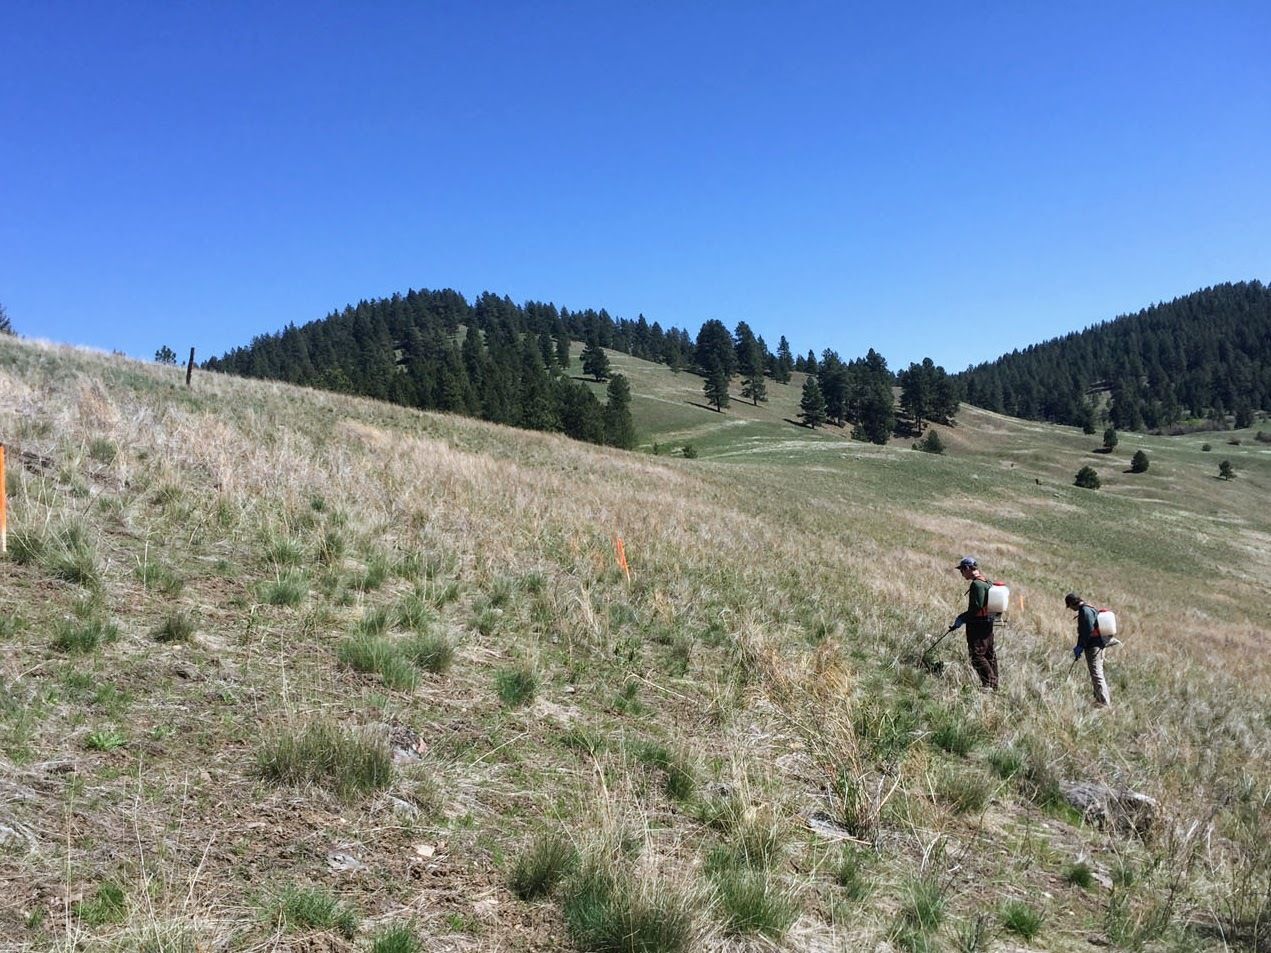 A weeds crew spraying on the hills above Missoula.